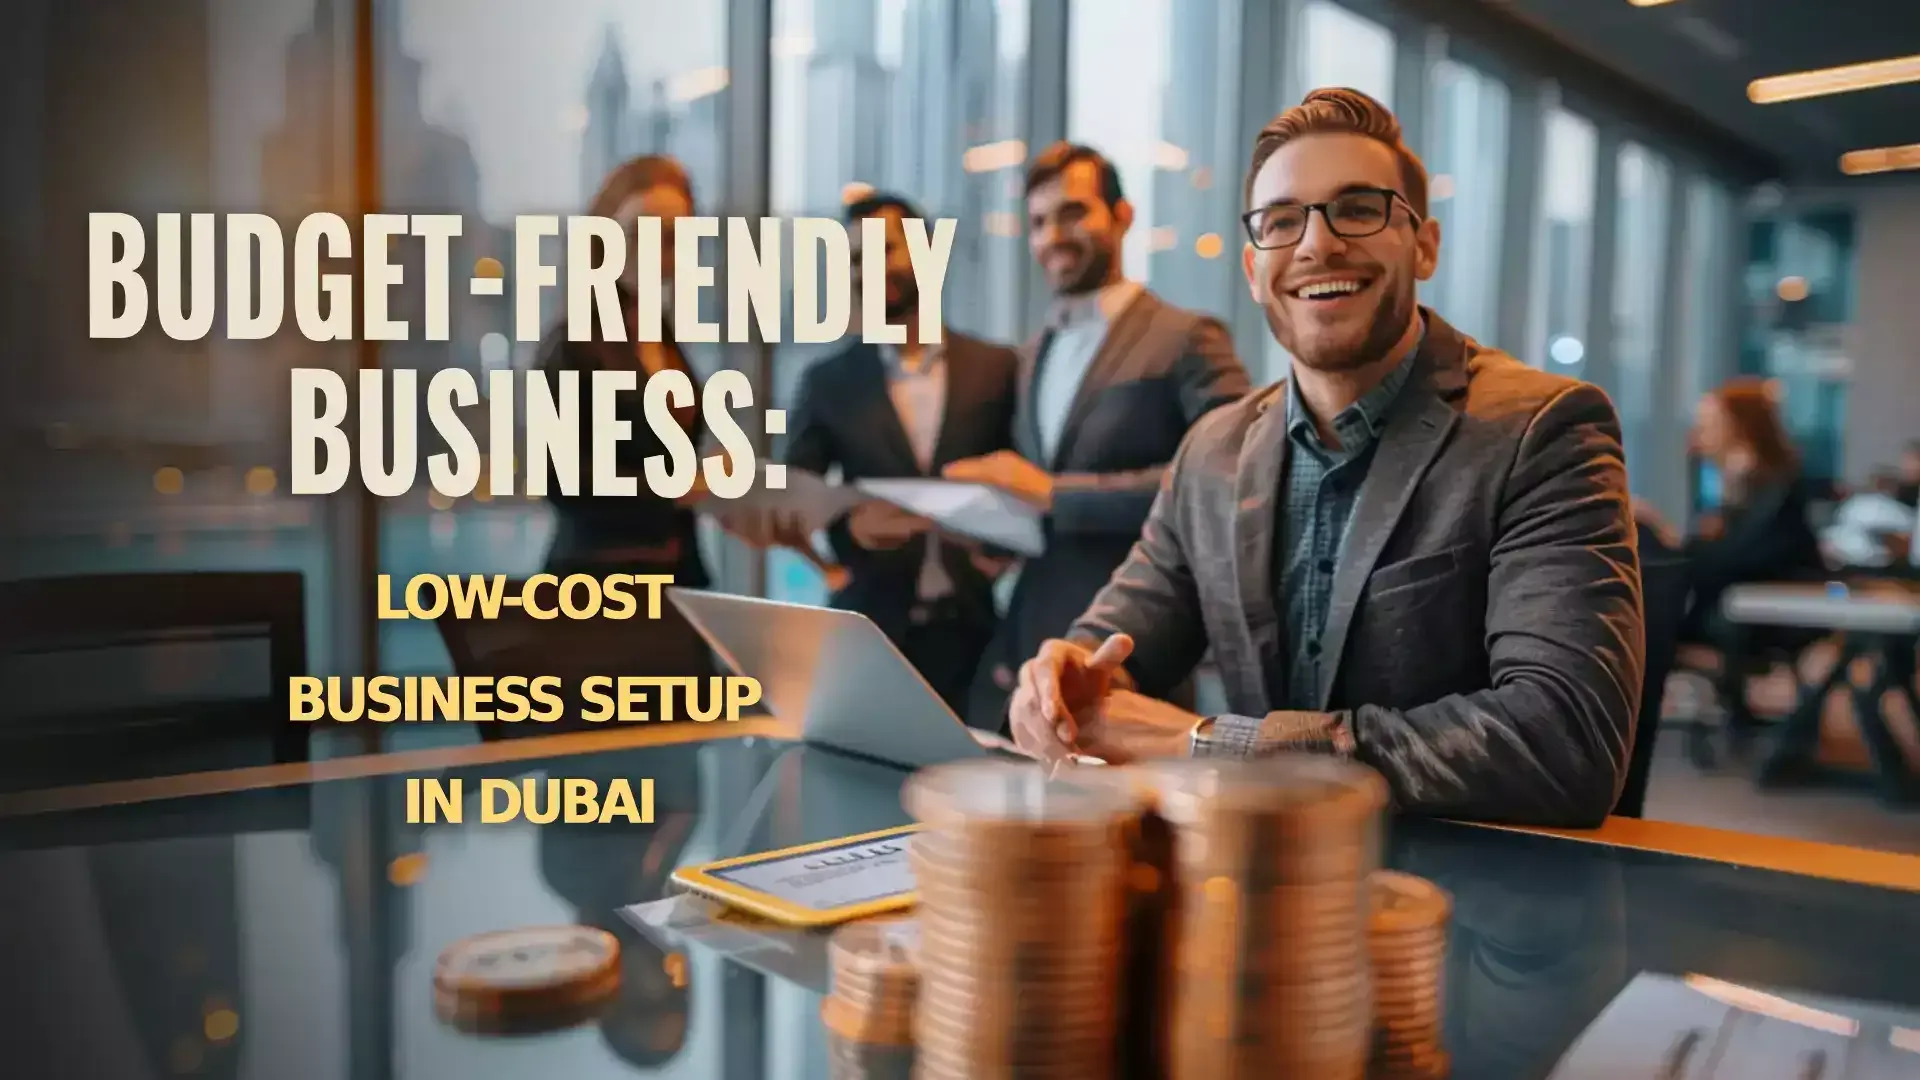 Low-cost business setup in Dubai - Affordable pathways to entrepreneurship